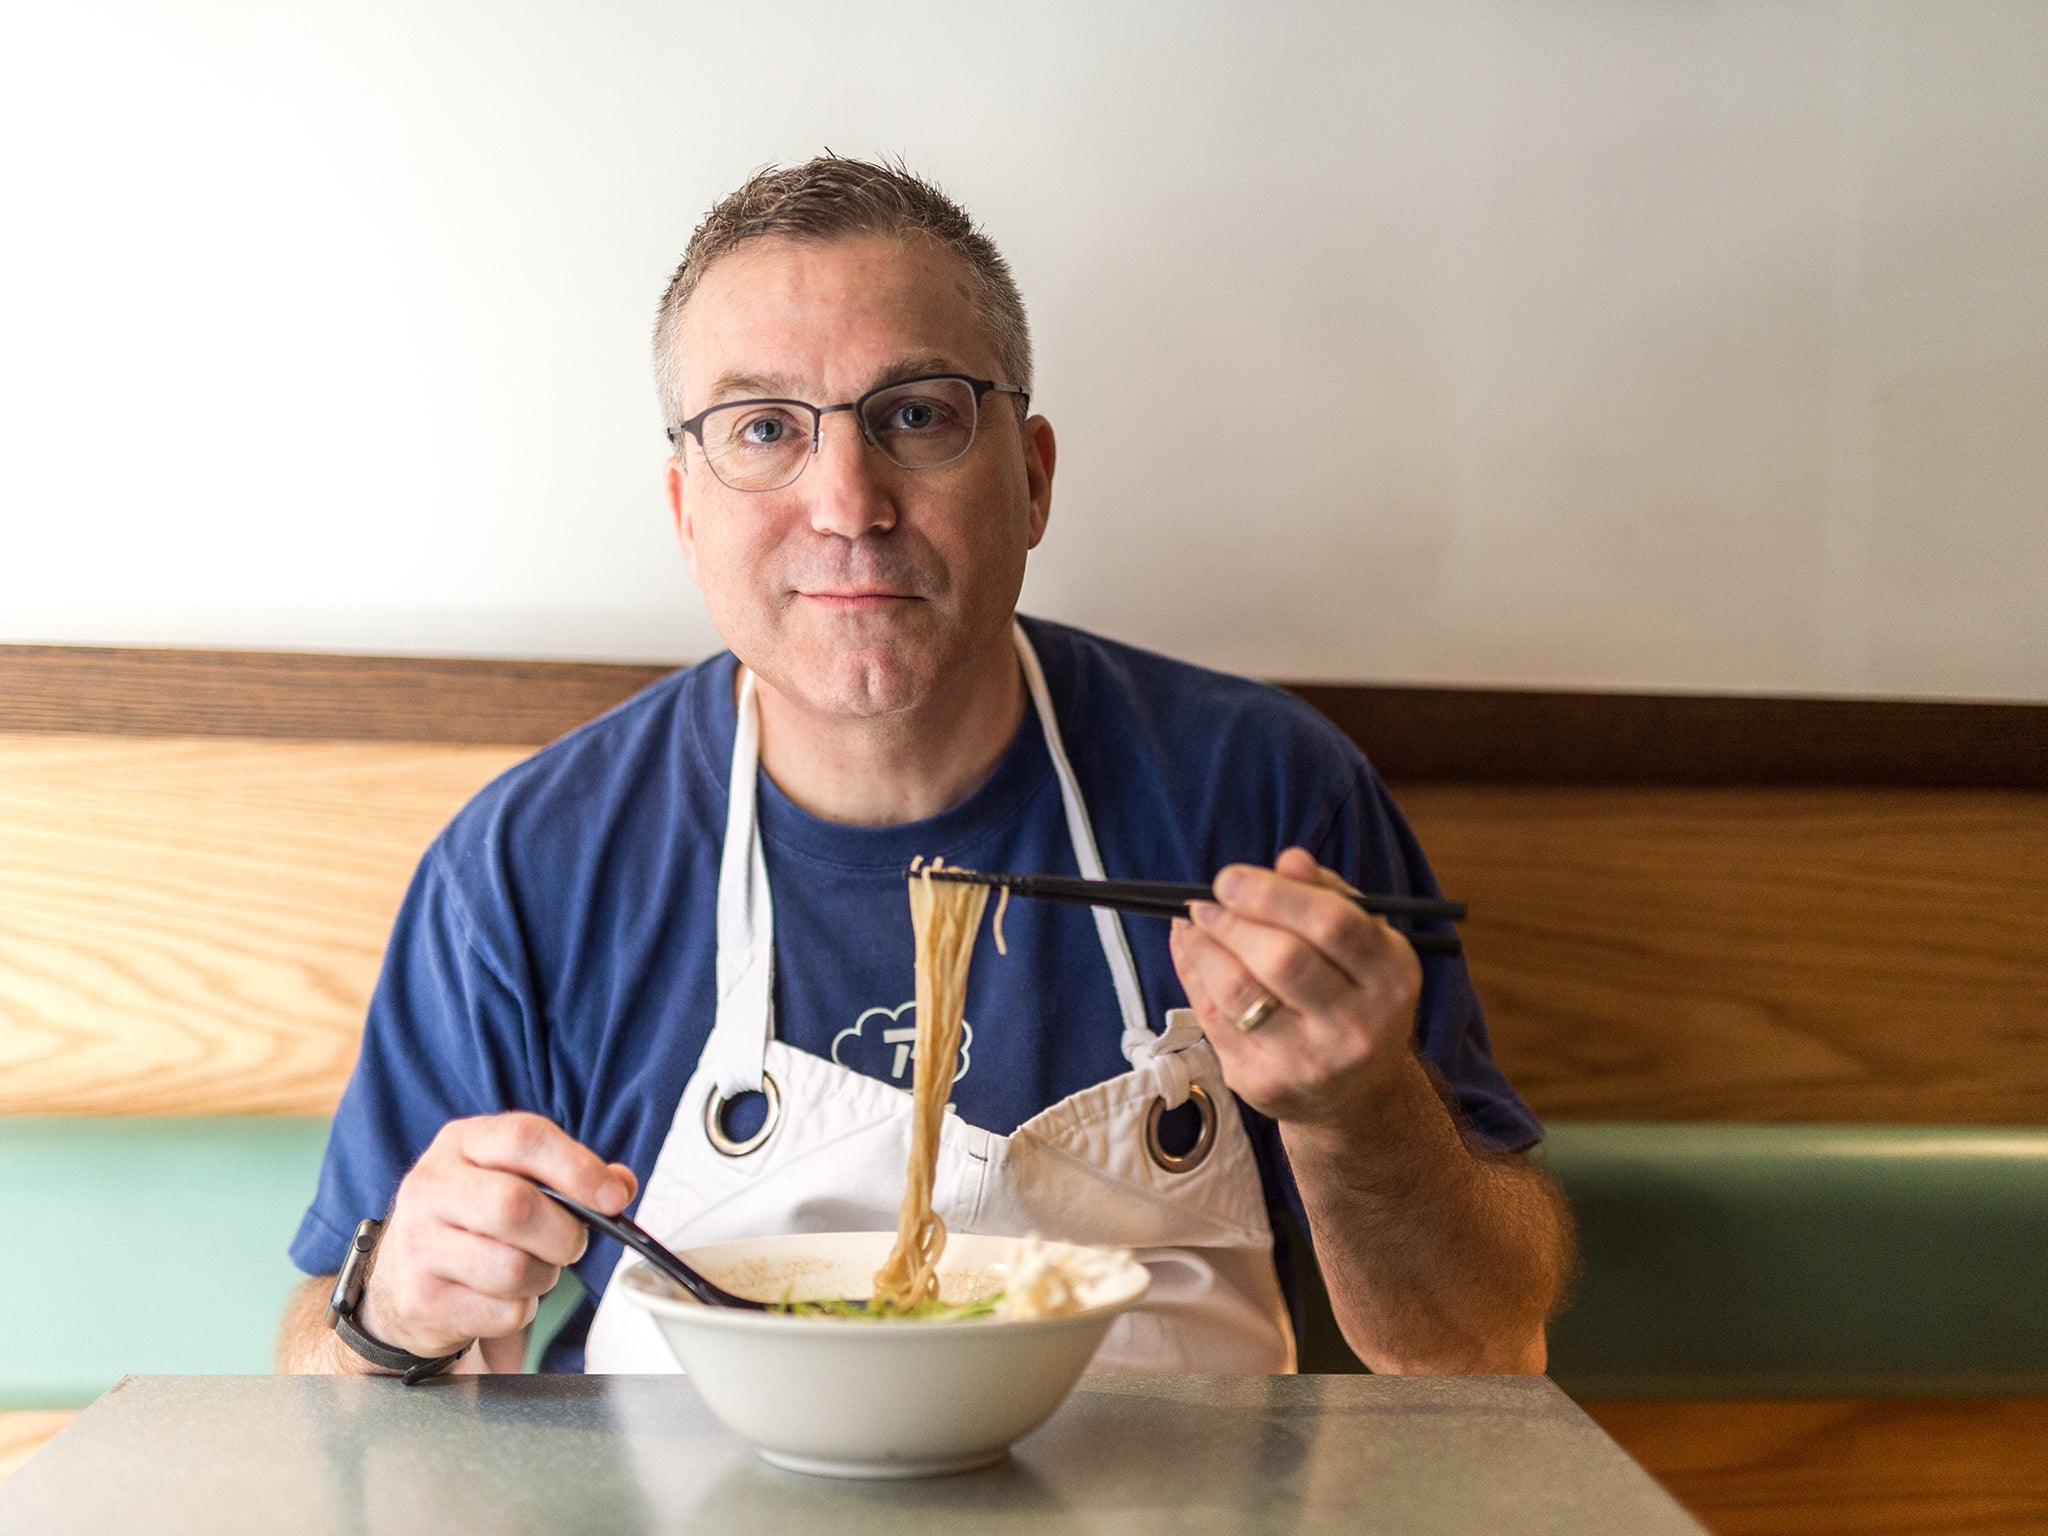 Ramen junkie Ivan Orkin on MSG and resilience of the human spirit | The Independent